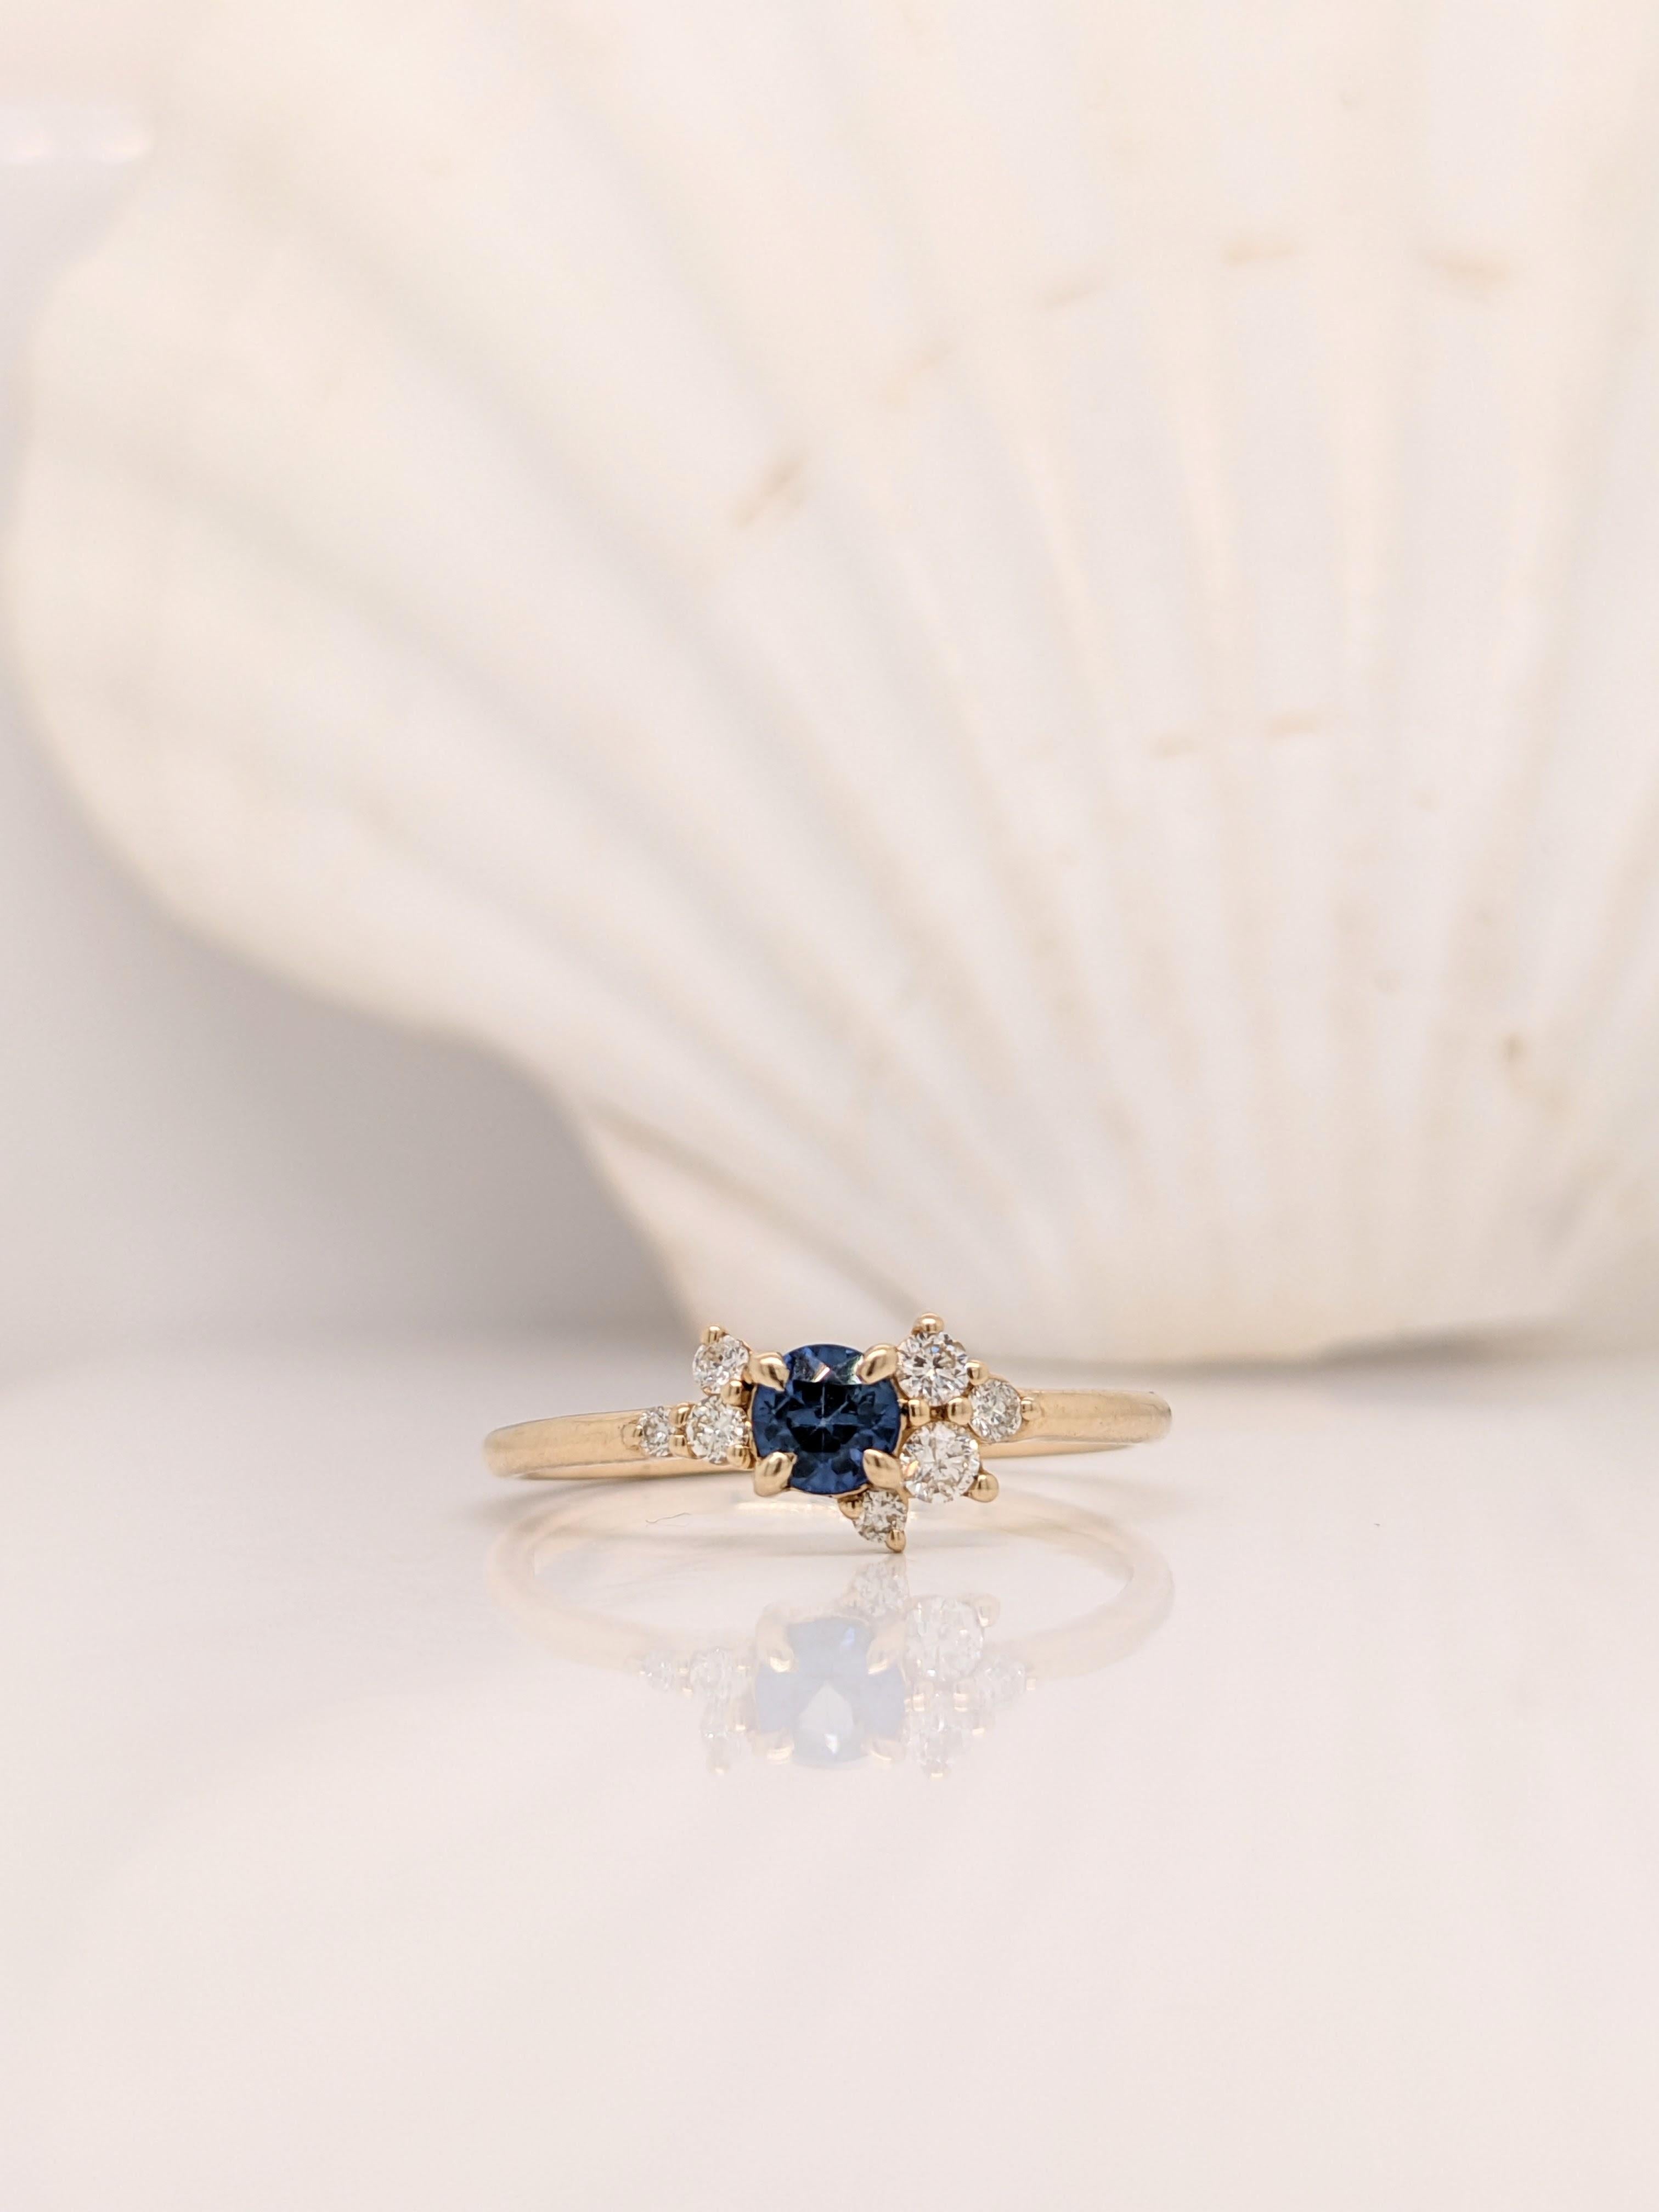 This simple and sleek blue Sapphire ring is made for the minimalist in your life! With asymmetrical diamond accents around a blue sapphire, this piece is subtle and classy. Its sturdy band allows for every day, worry-free wear.

Specifications

Item